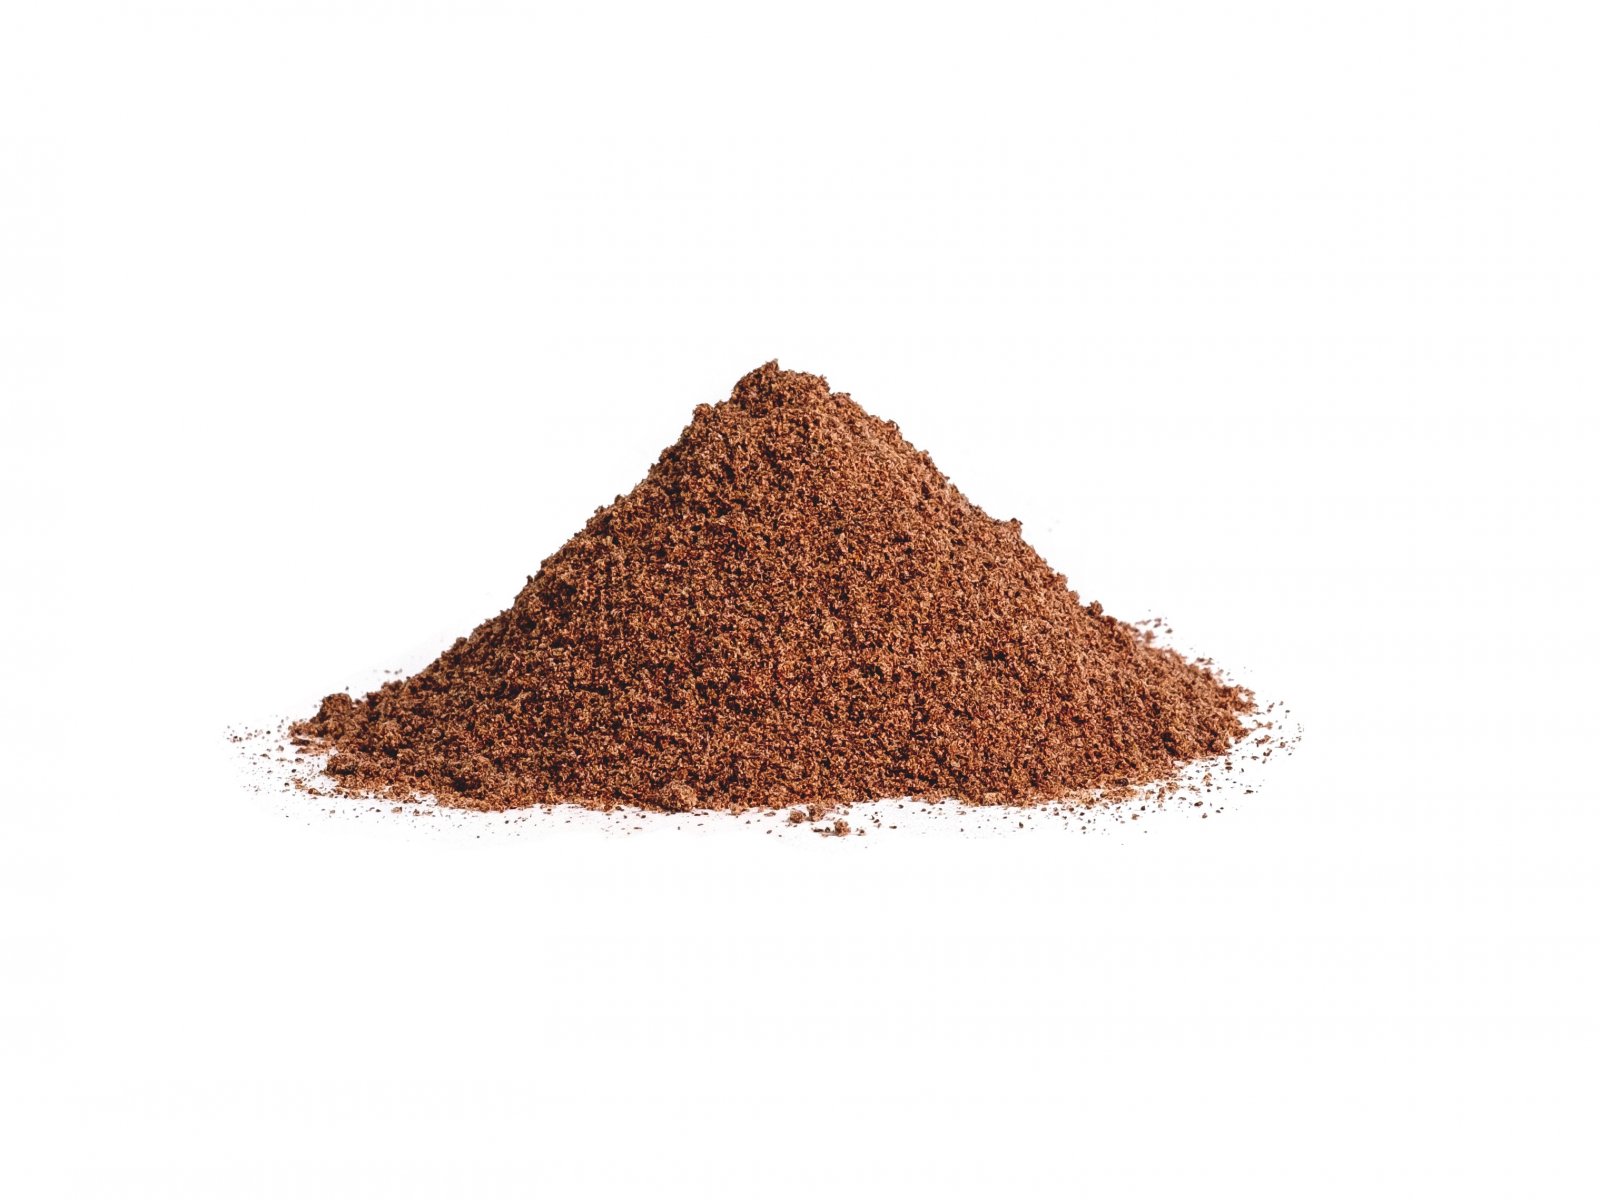 ORGANIC LINSEED FLOUR - Organic linseed flour obtained by grinding linseed. - 3